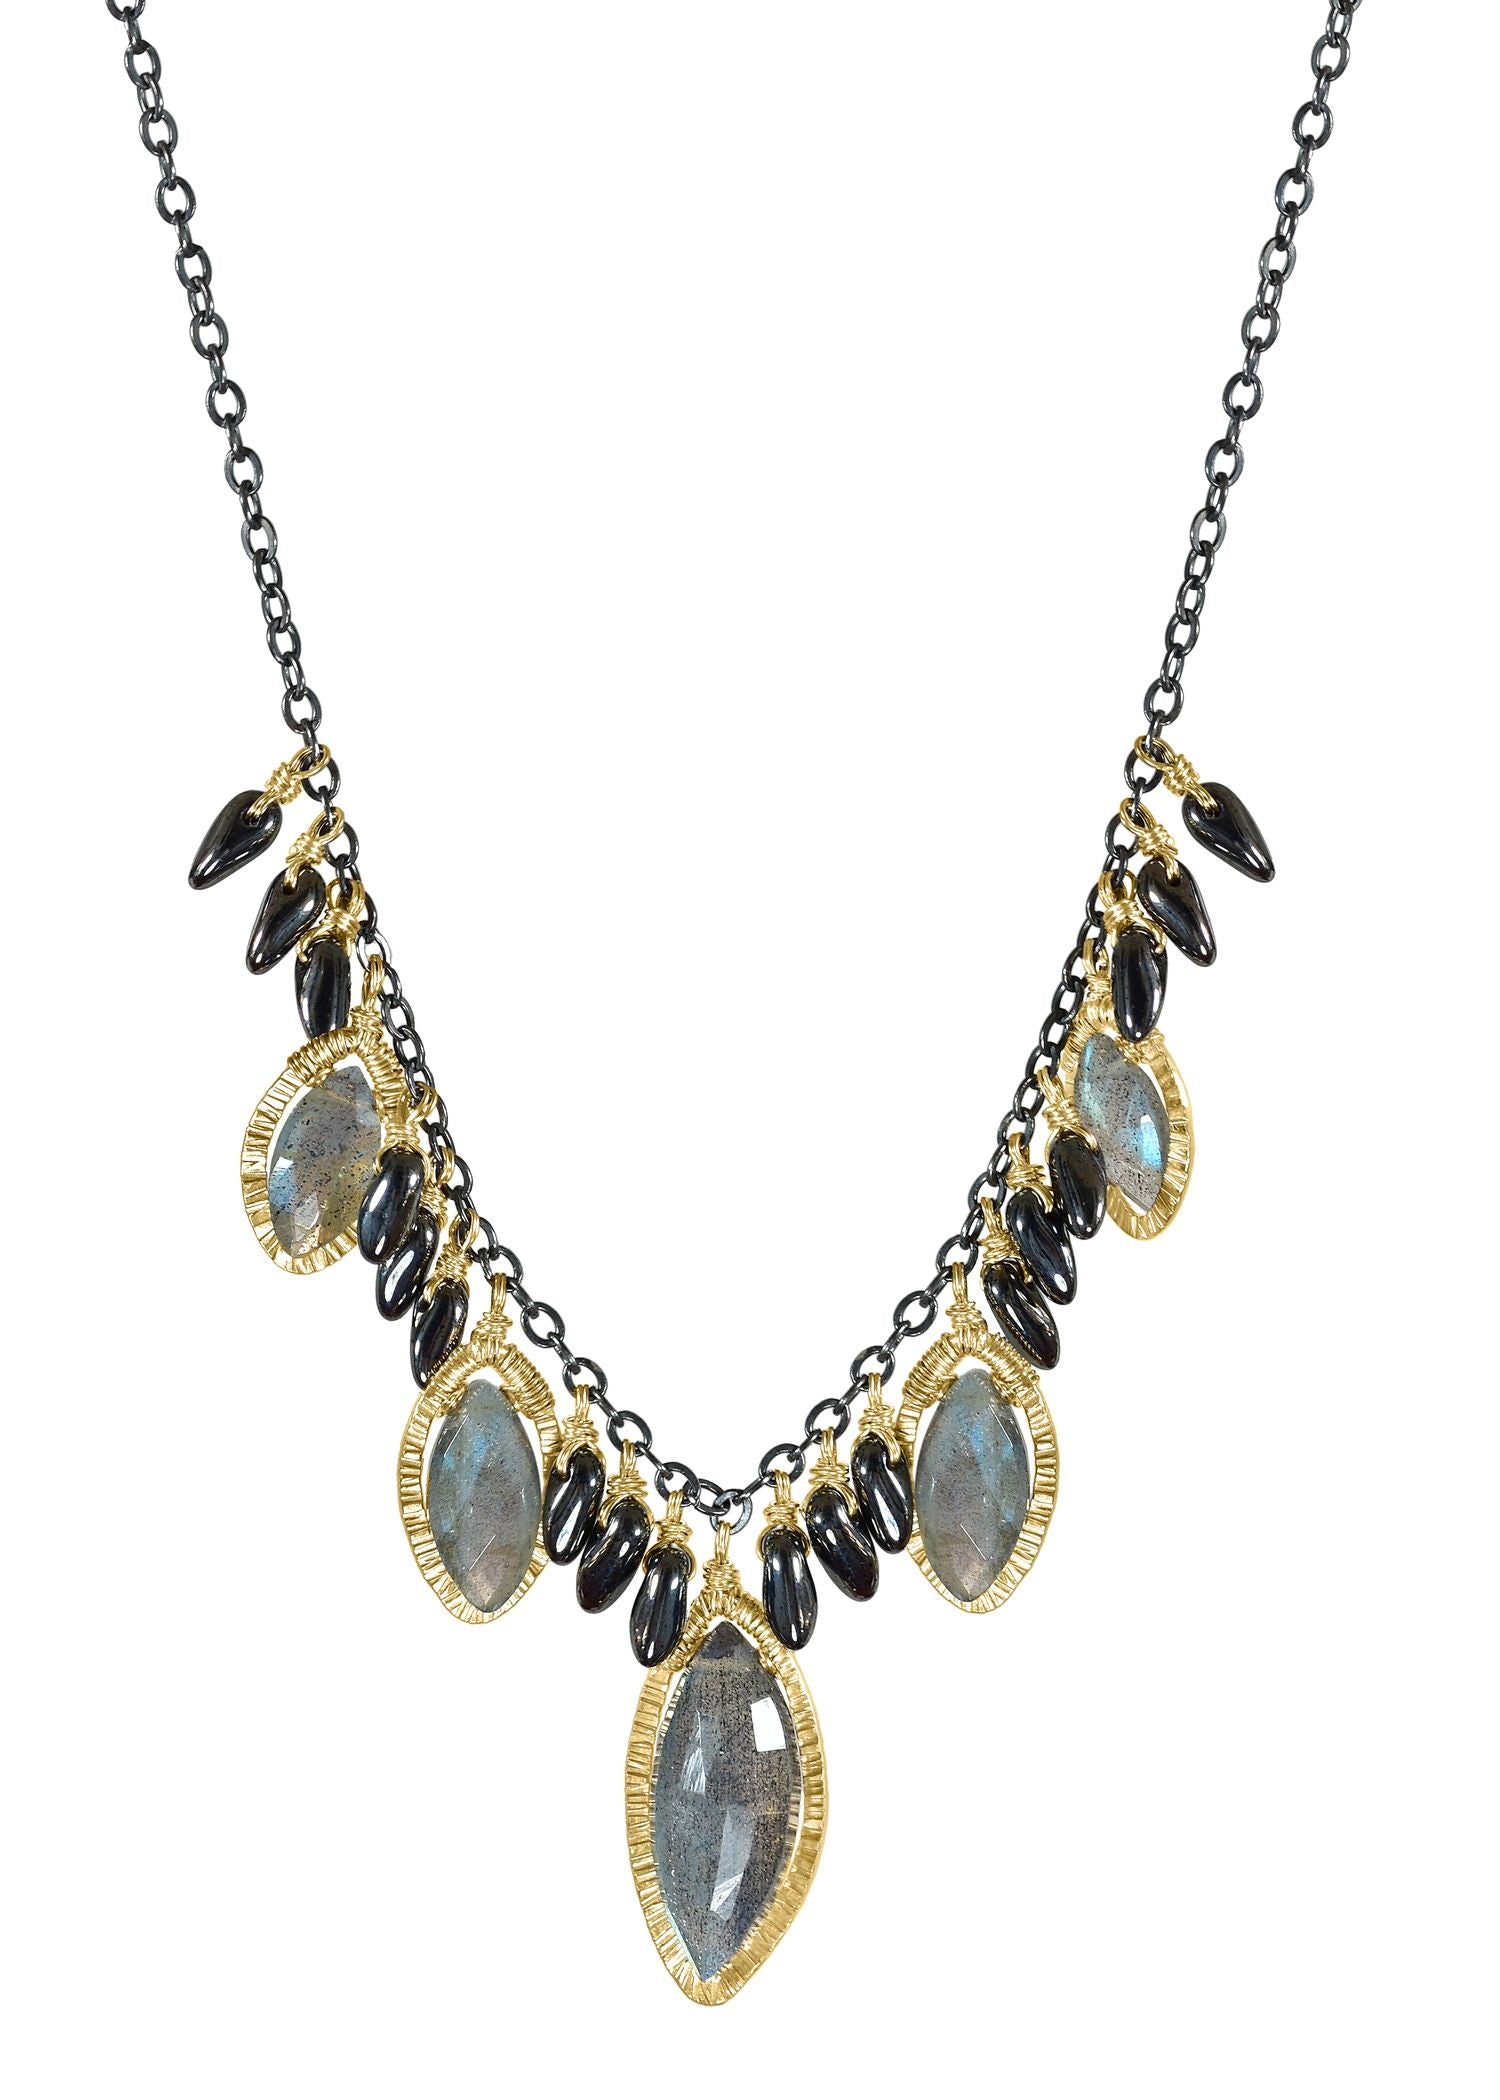 Labradorite Hematite glass beads 14k gold fill Blackened sterling silver Necklace measures 18-1/4" in length Pendant measures 13/16" in length and 3/8" in width Handmade in our Los Angeles studio